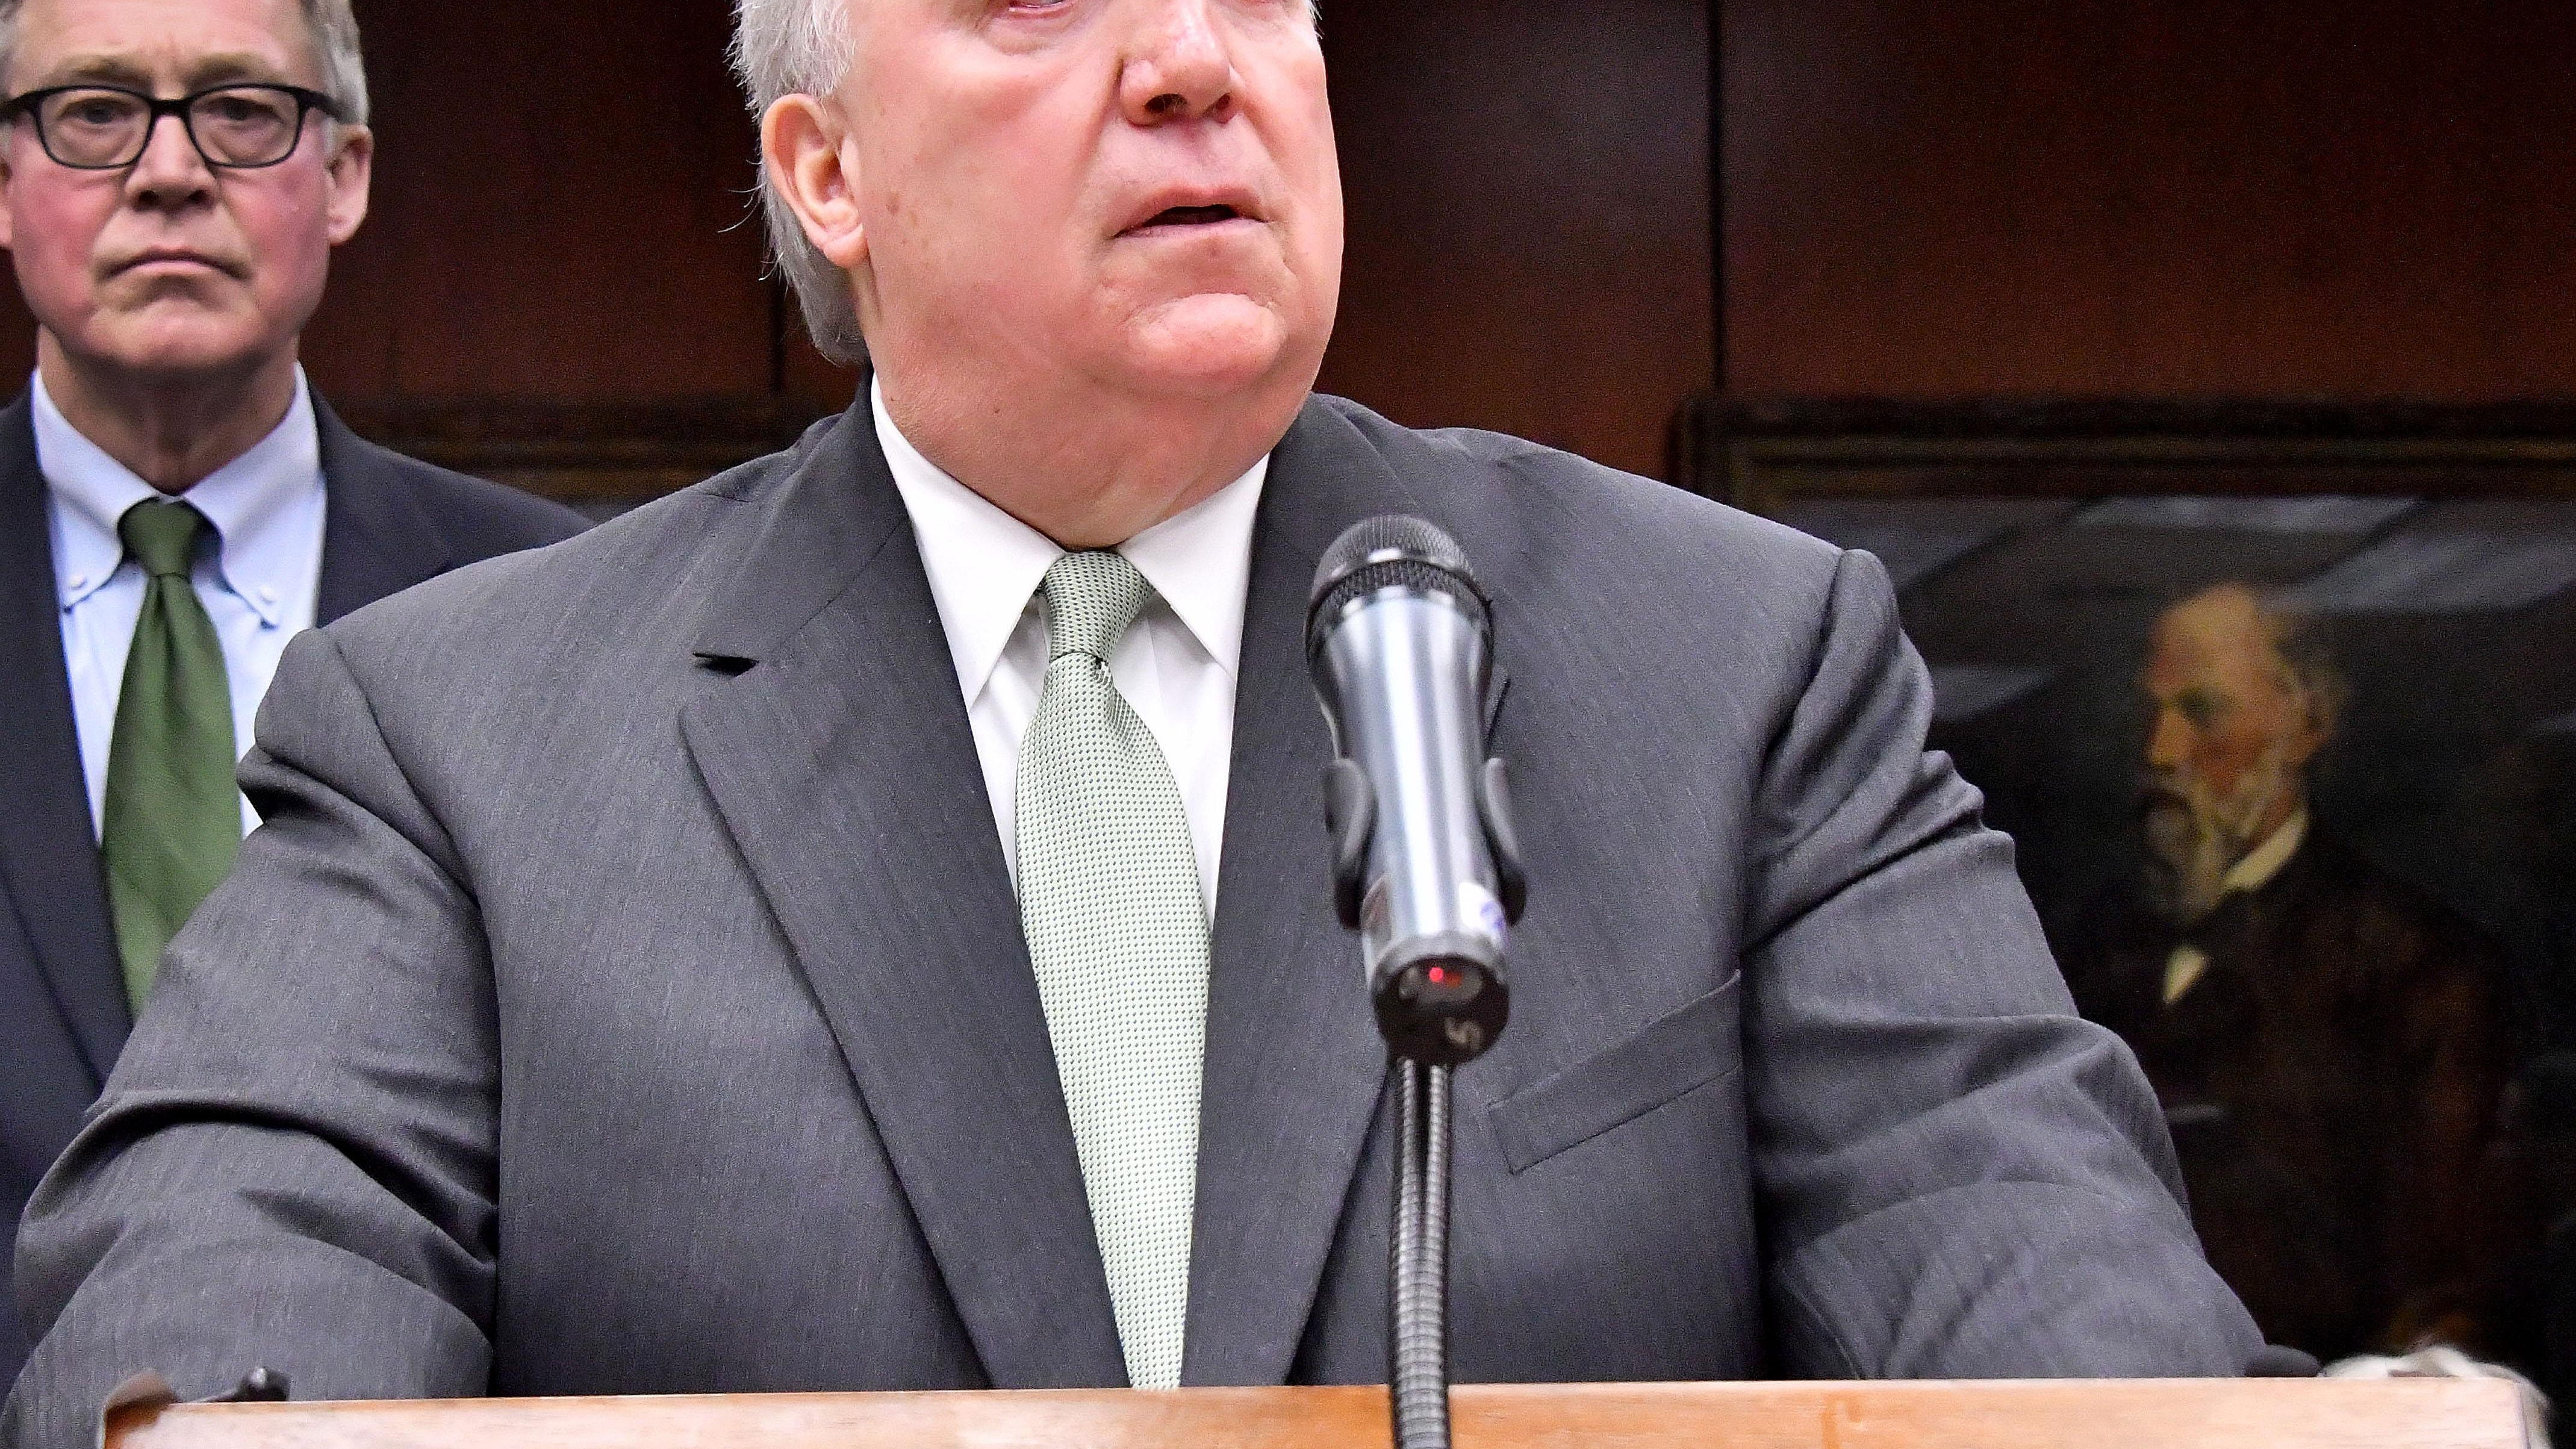 Former Michigan Gov. John Engler, who was Michigan governor from 1991 to 2003, praised survivors’ courage and said he will do everything in his power to change the culture at MSU, calling this an “excruciatingly difficult time for the university.”